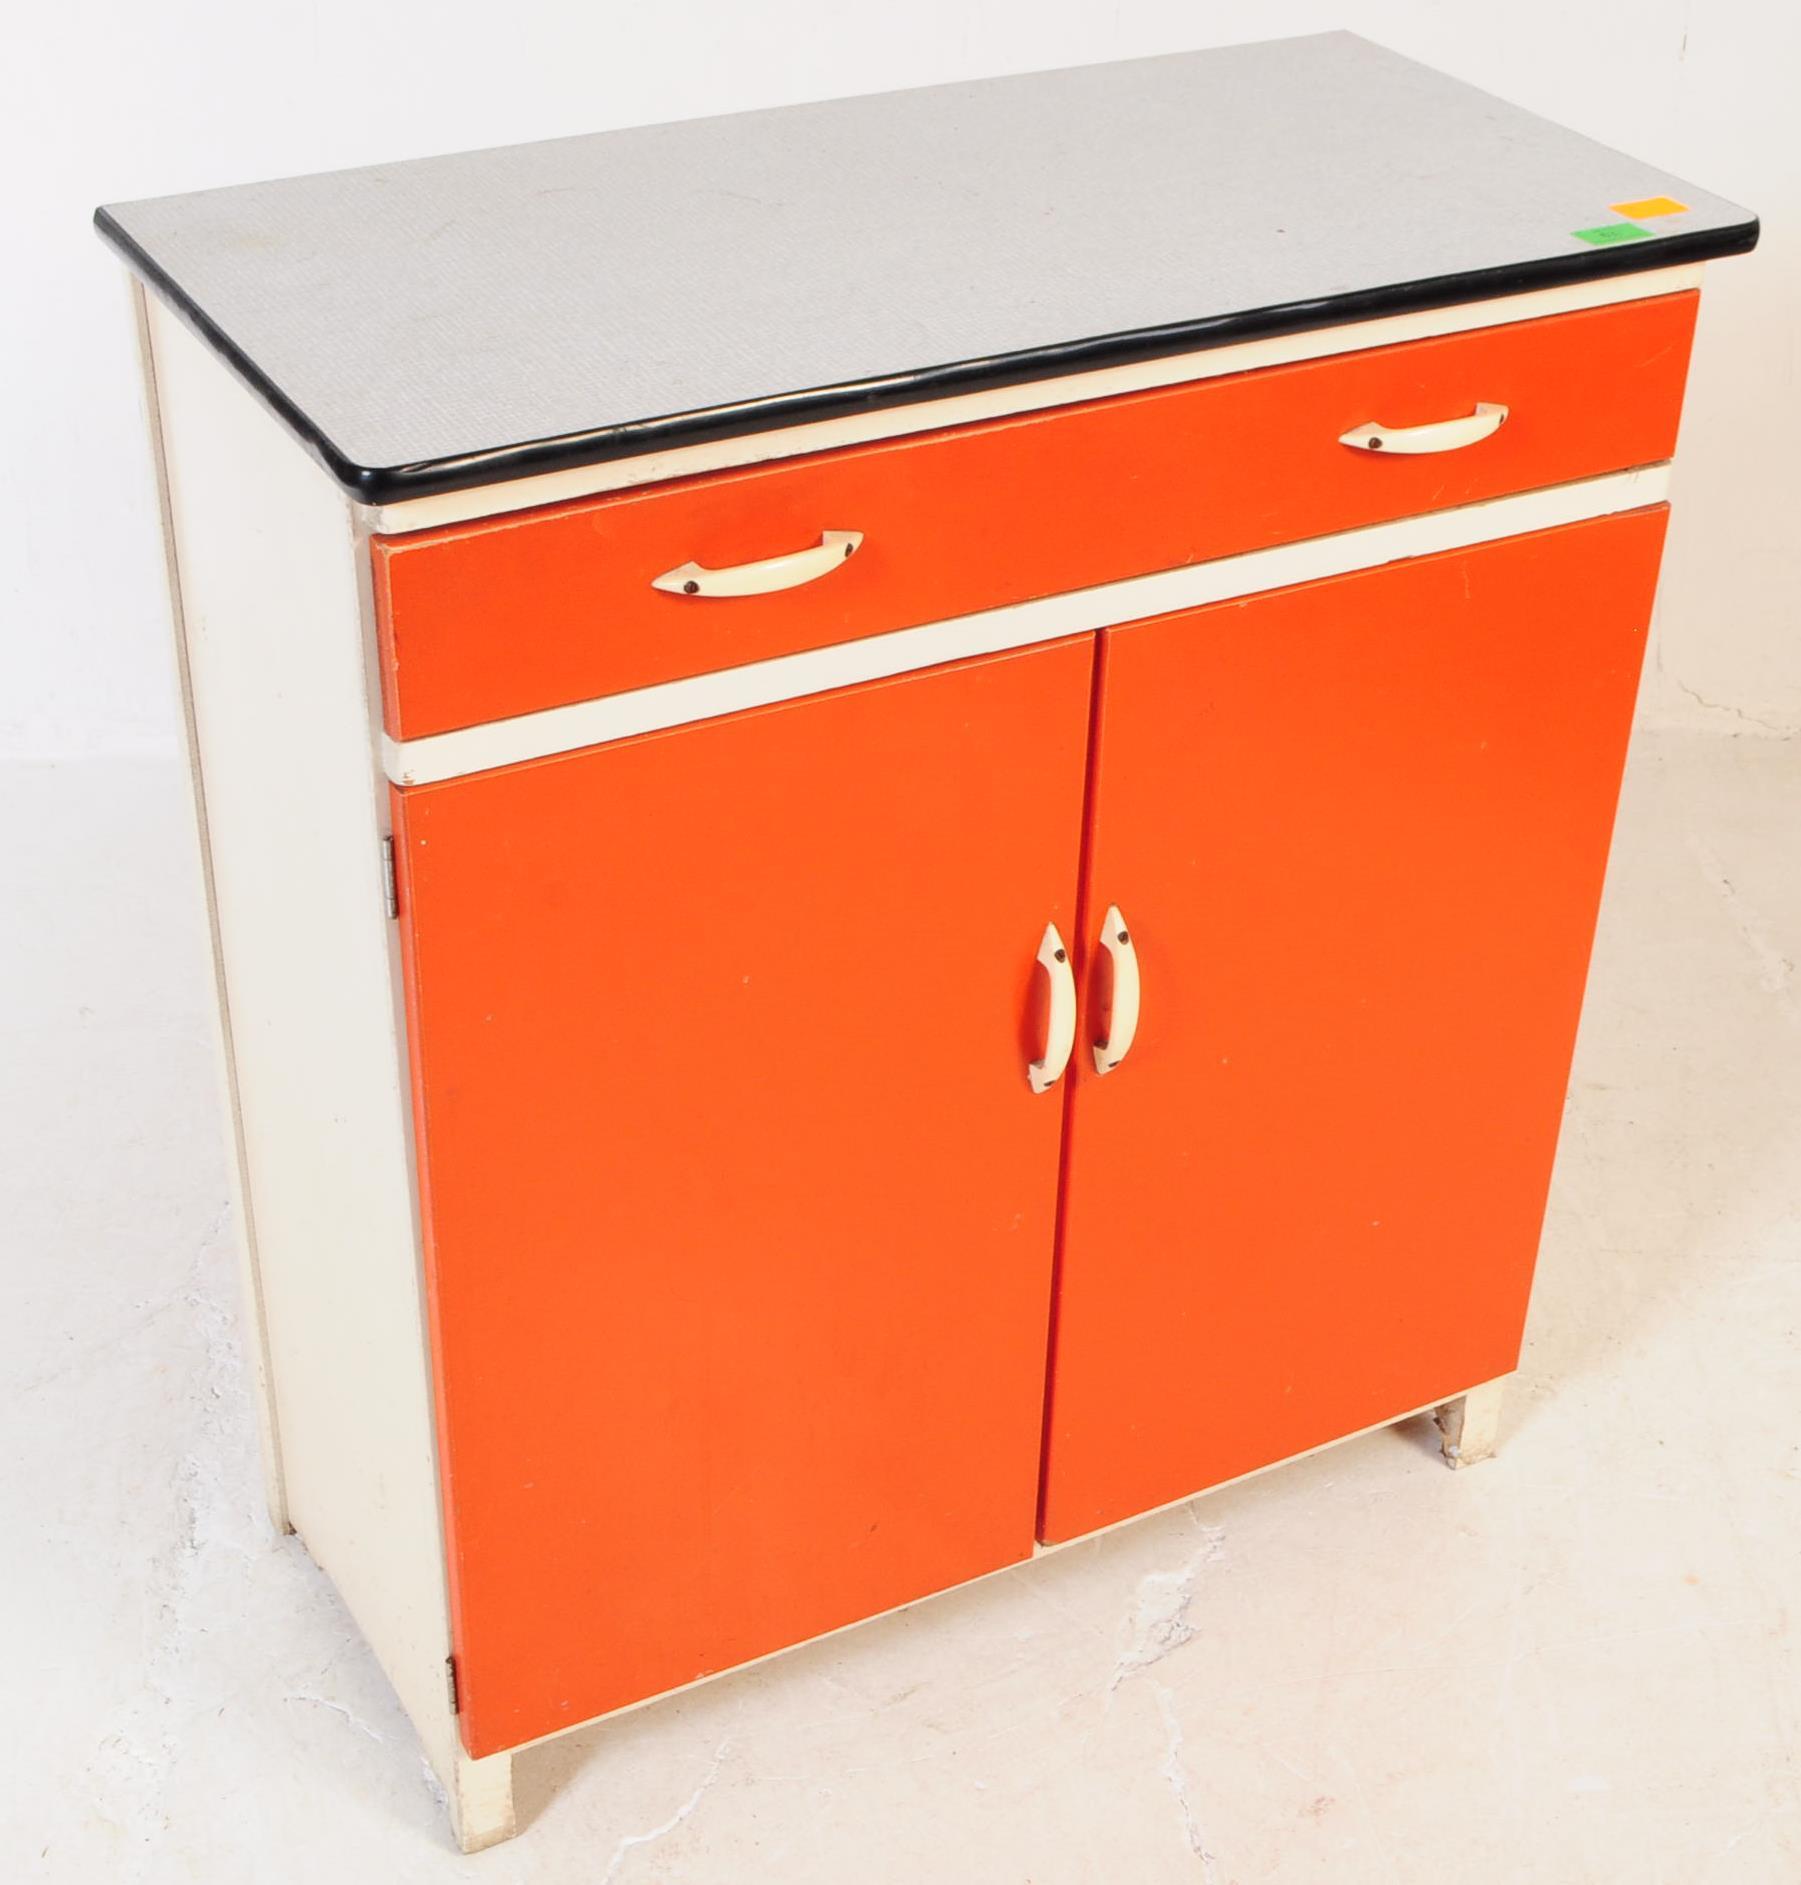 MID 20TH CENTURY FORMICA KITCHEN UNIT - Image 2 of 7